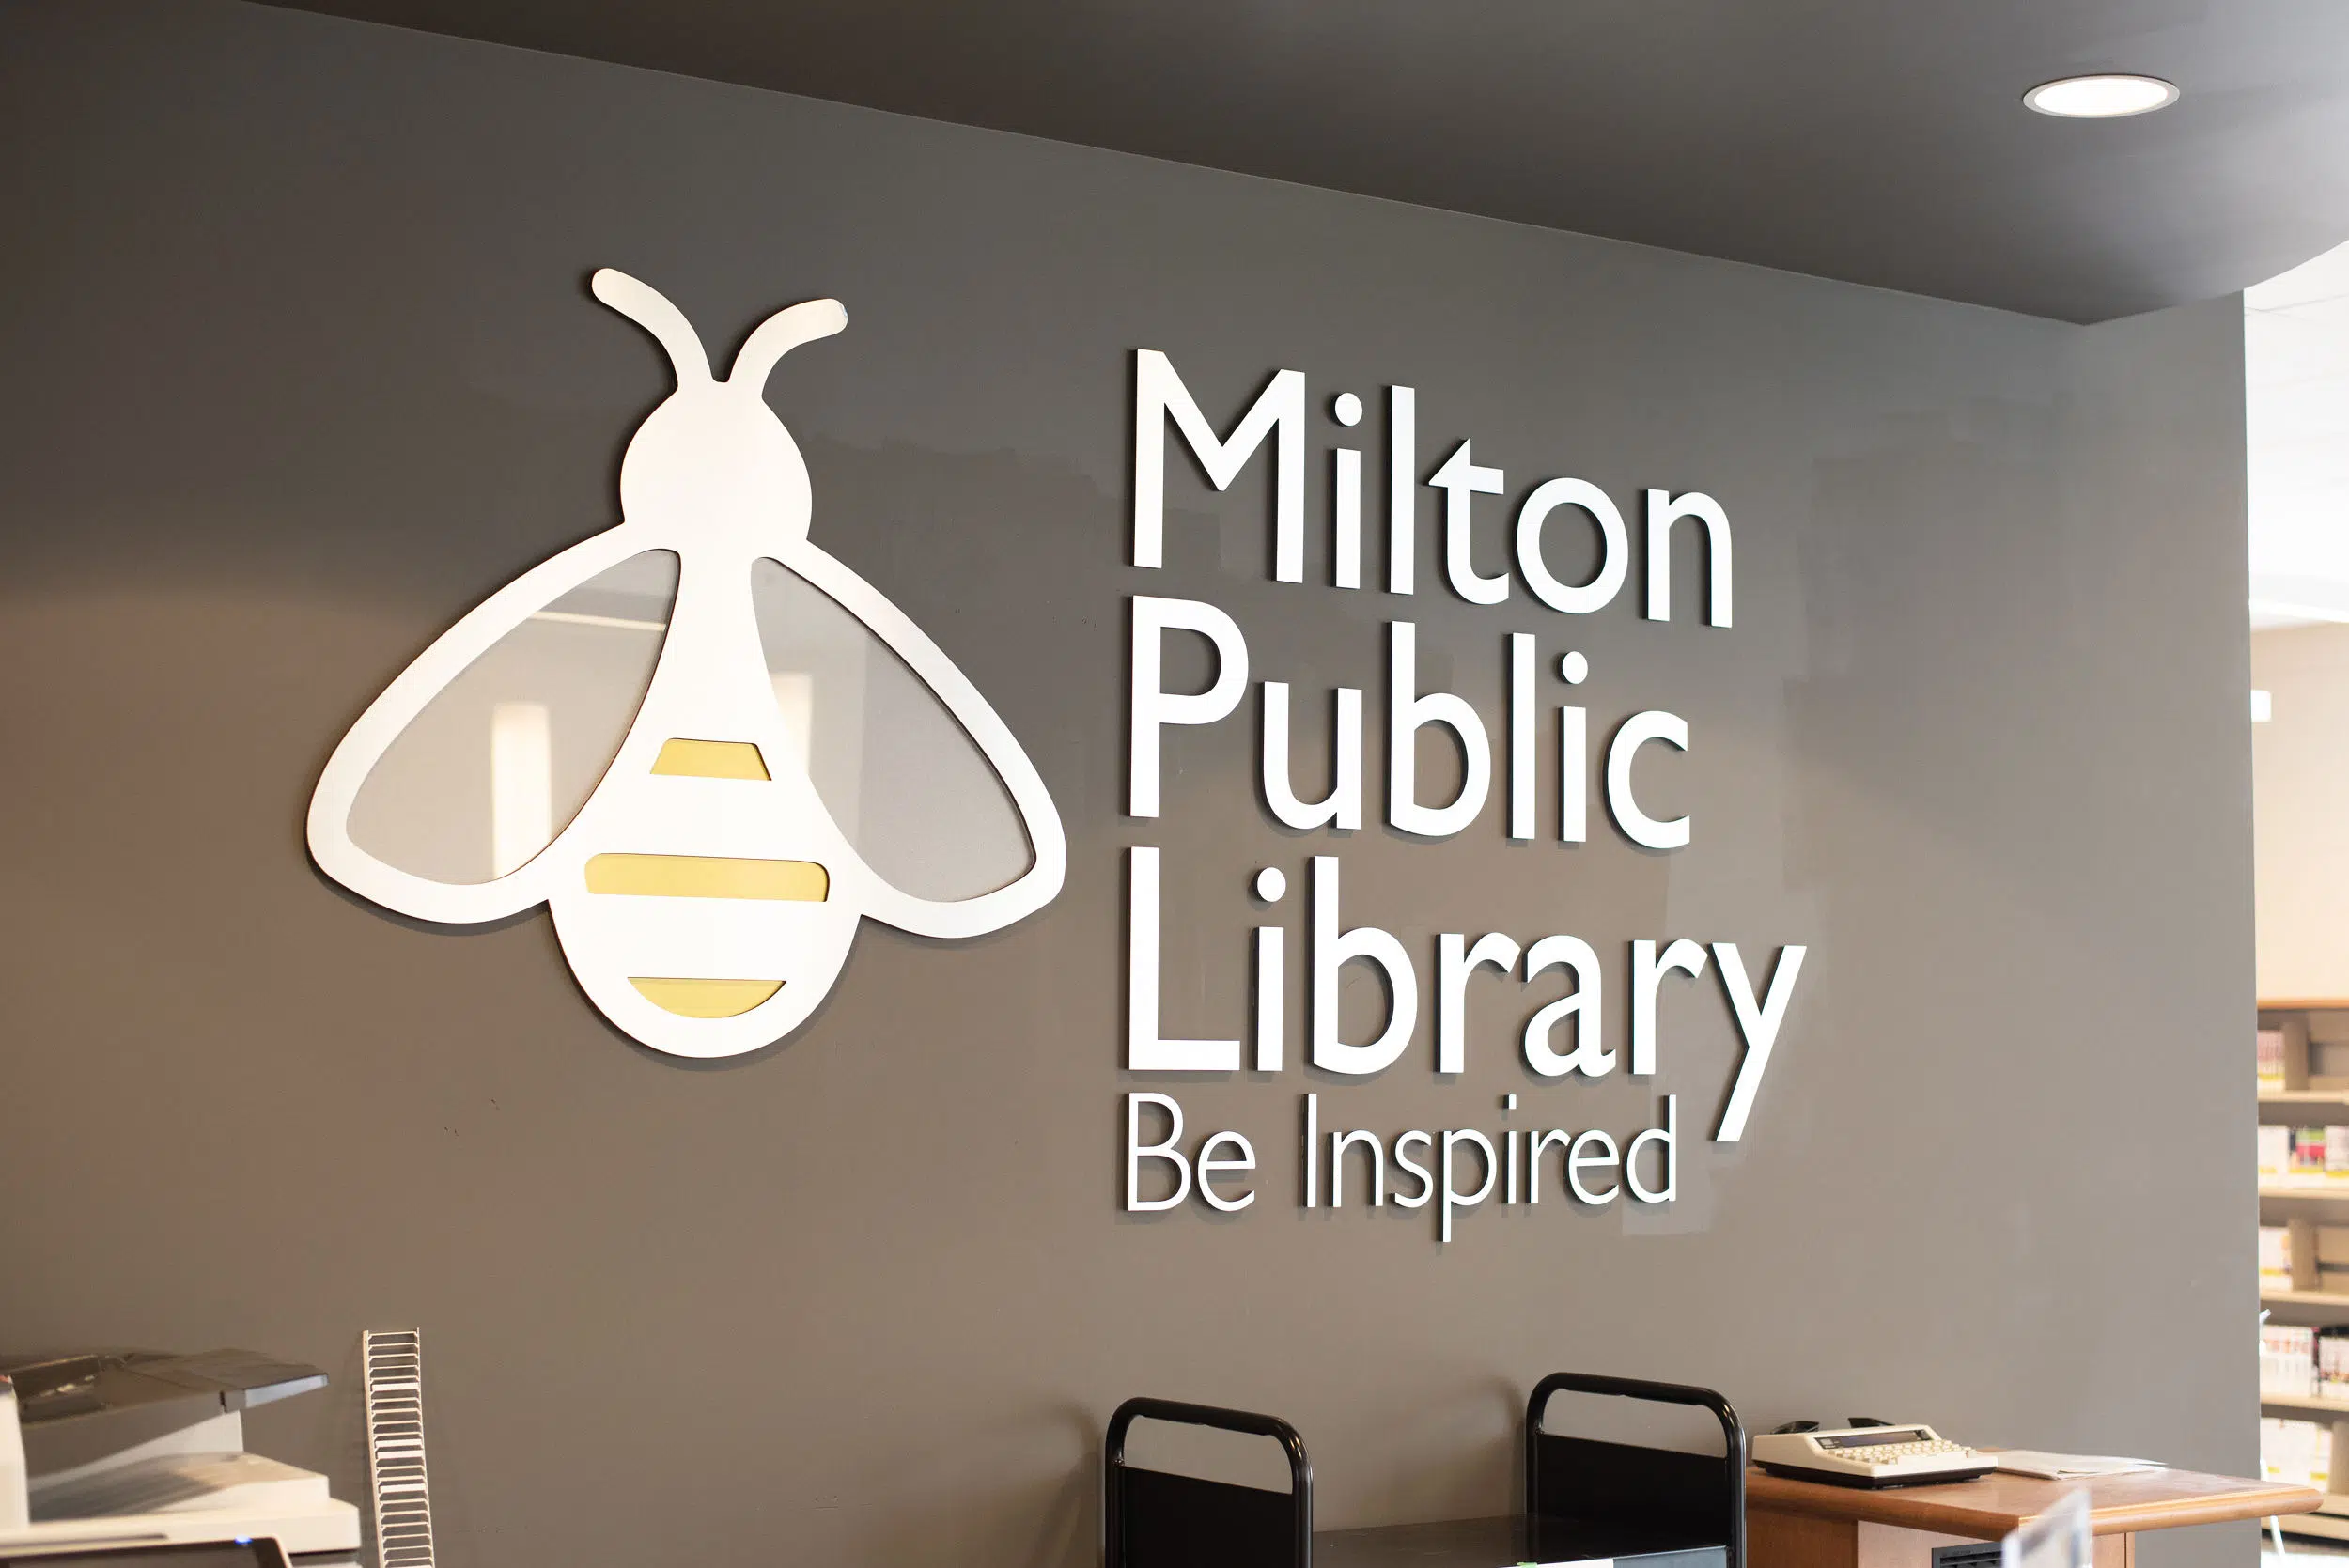 Milton Public Library receives funding for new art project